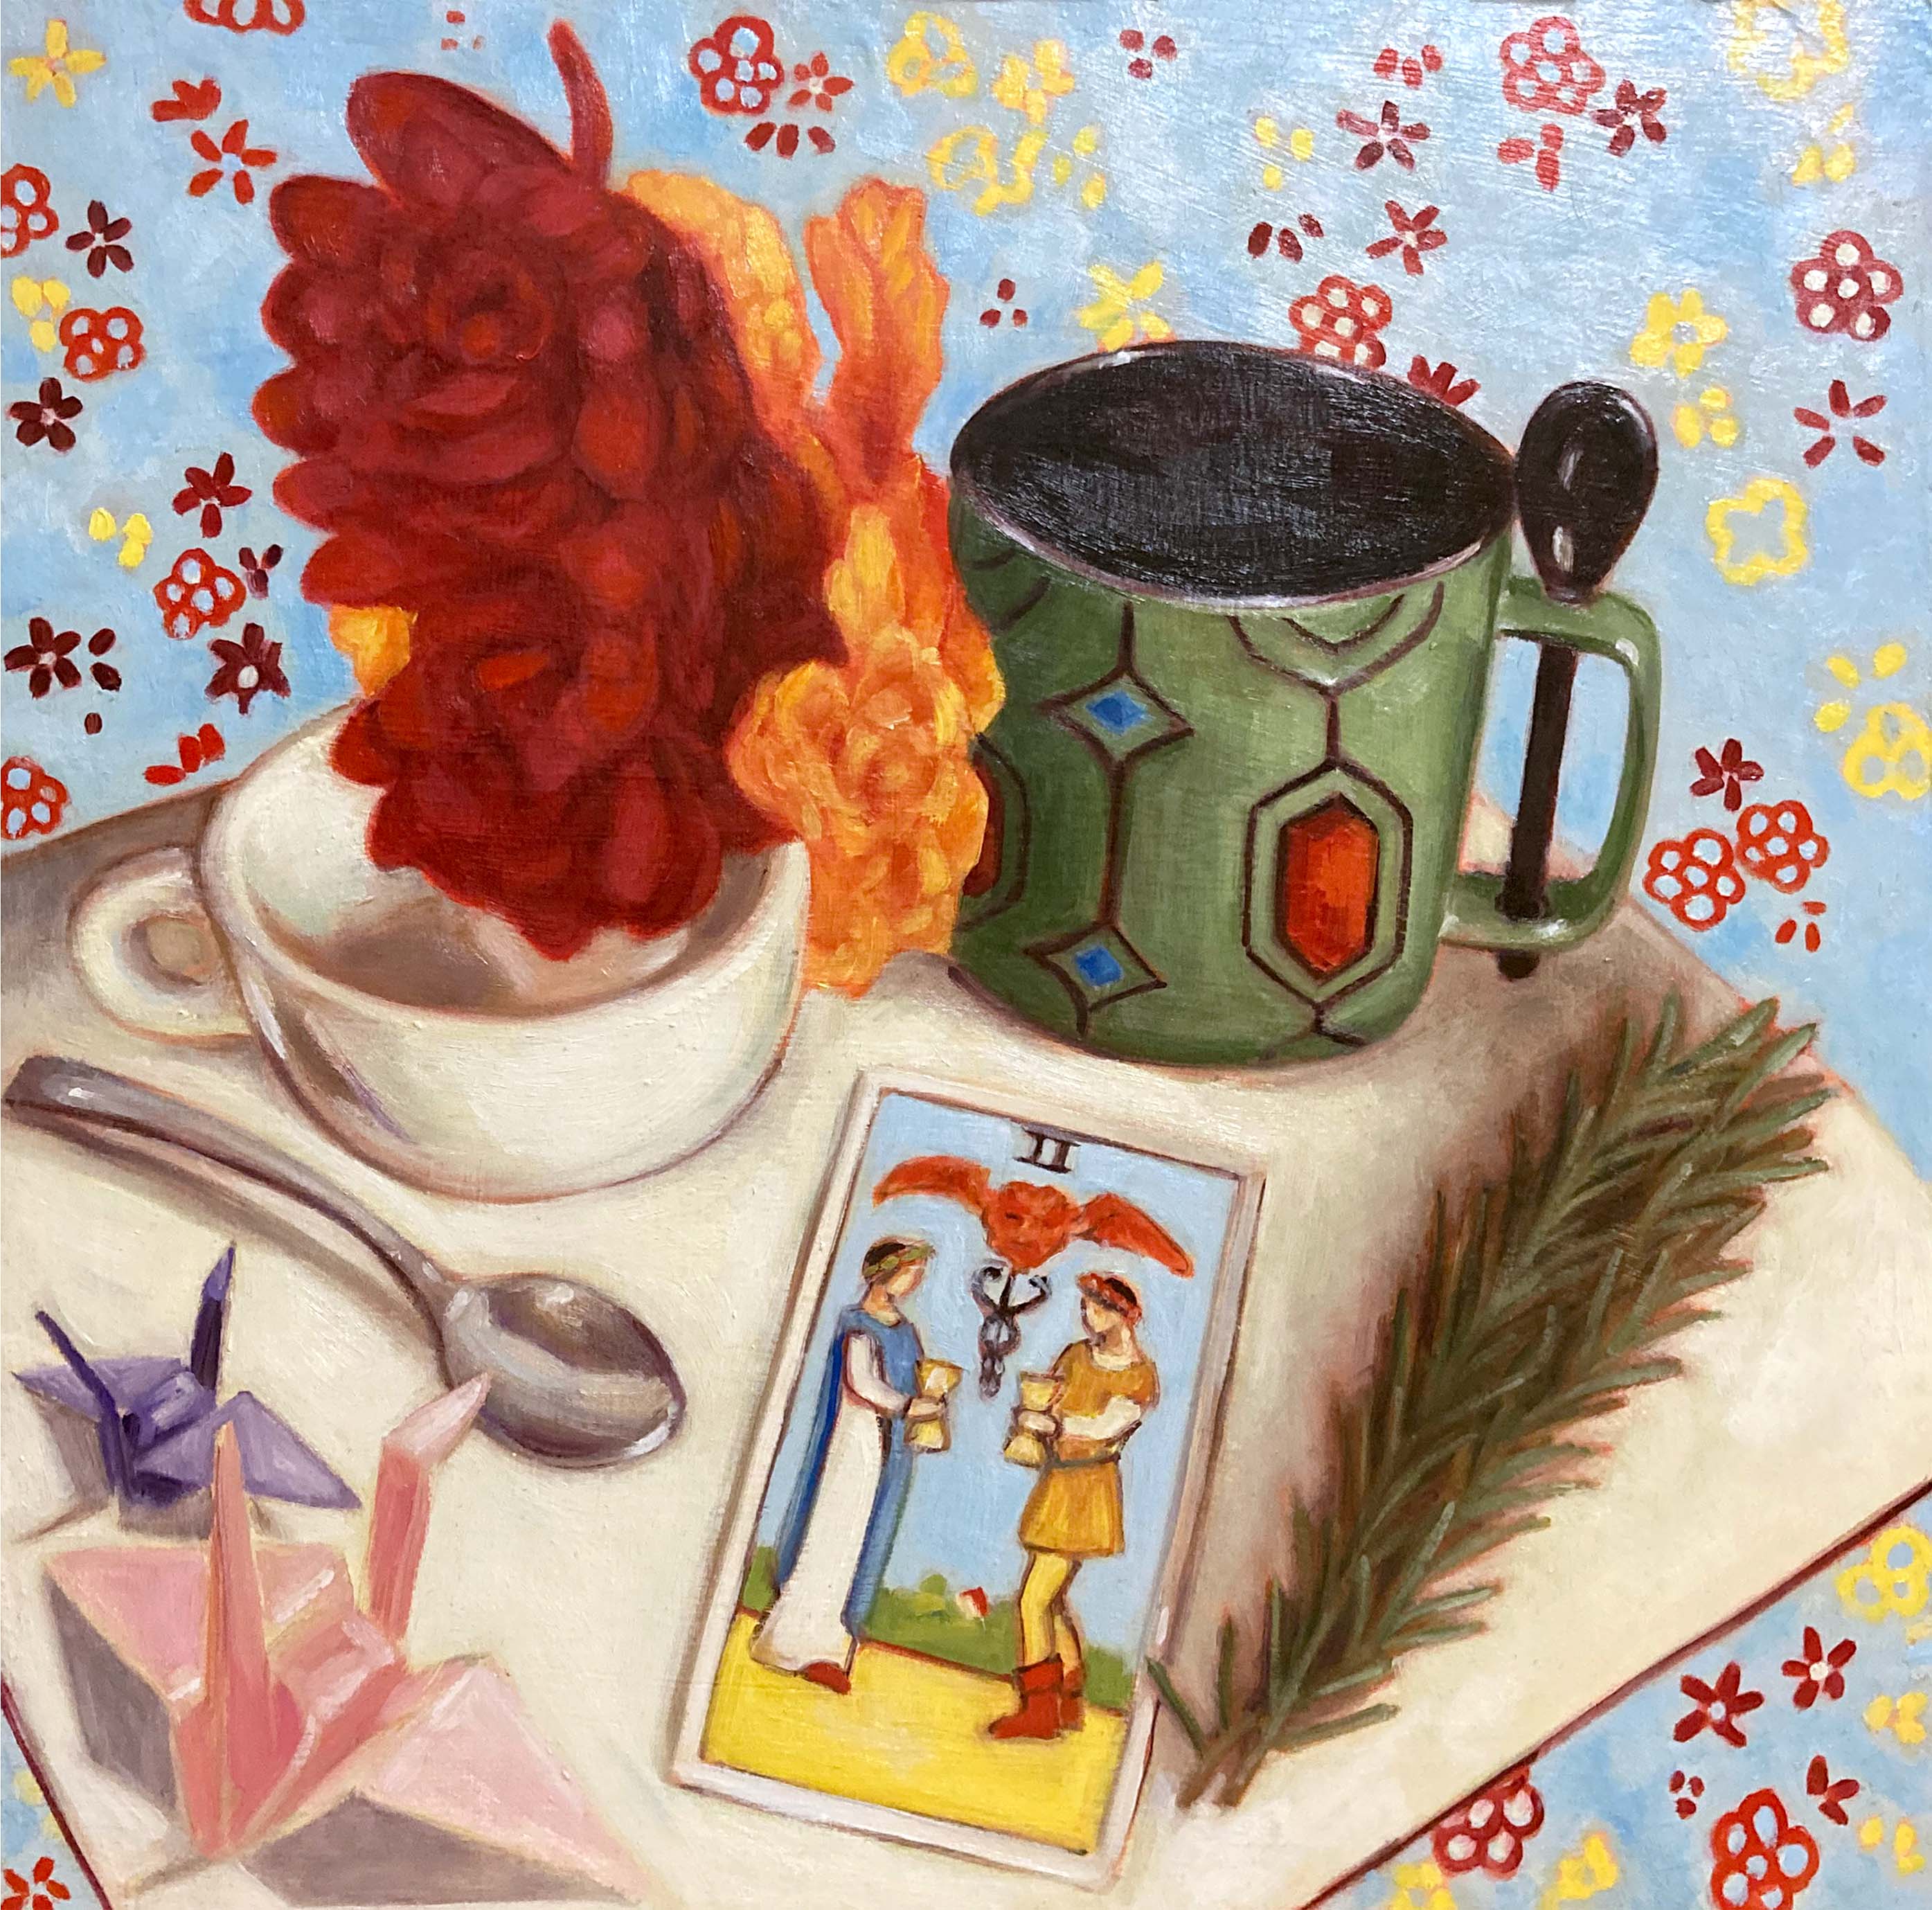 Painting of the Two of Cups Tarot card, two coffee cups, two paper cranes on a background of flowers.